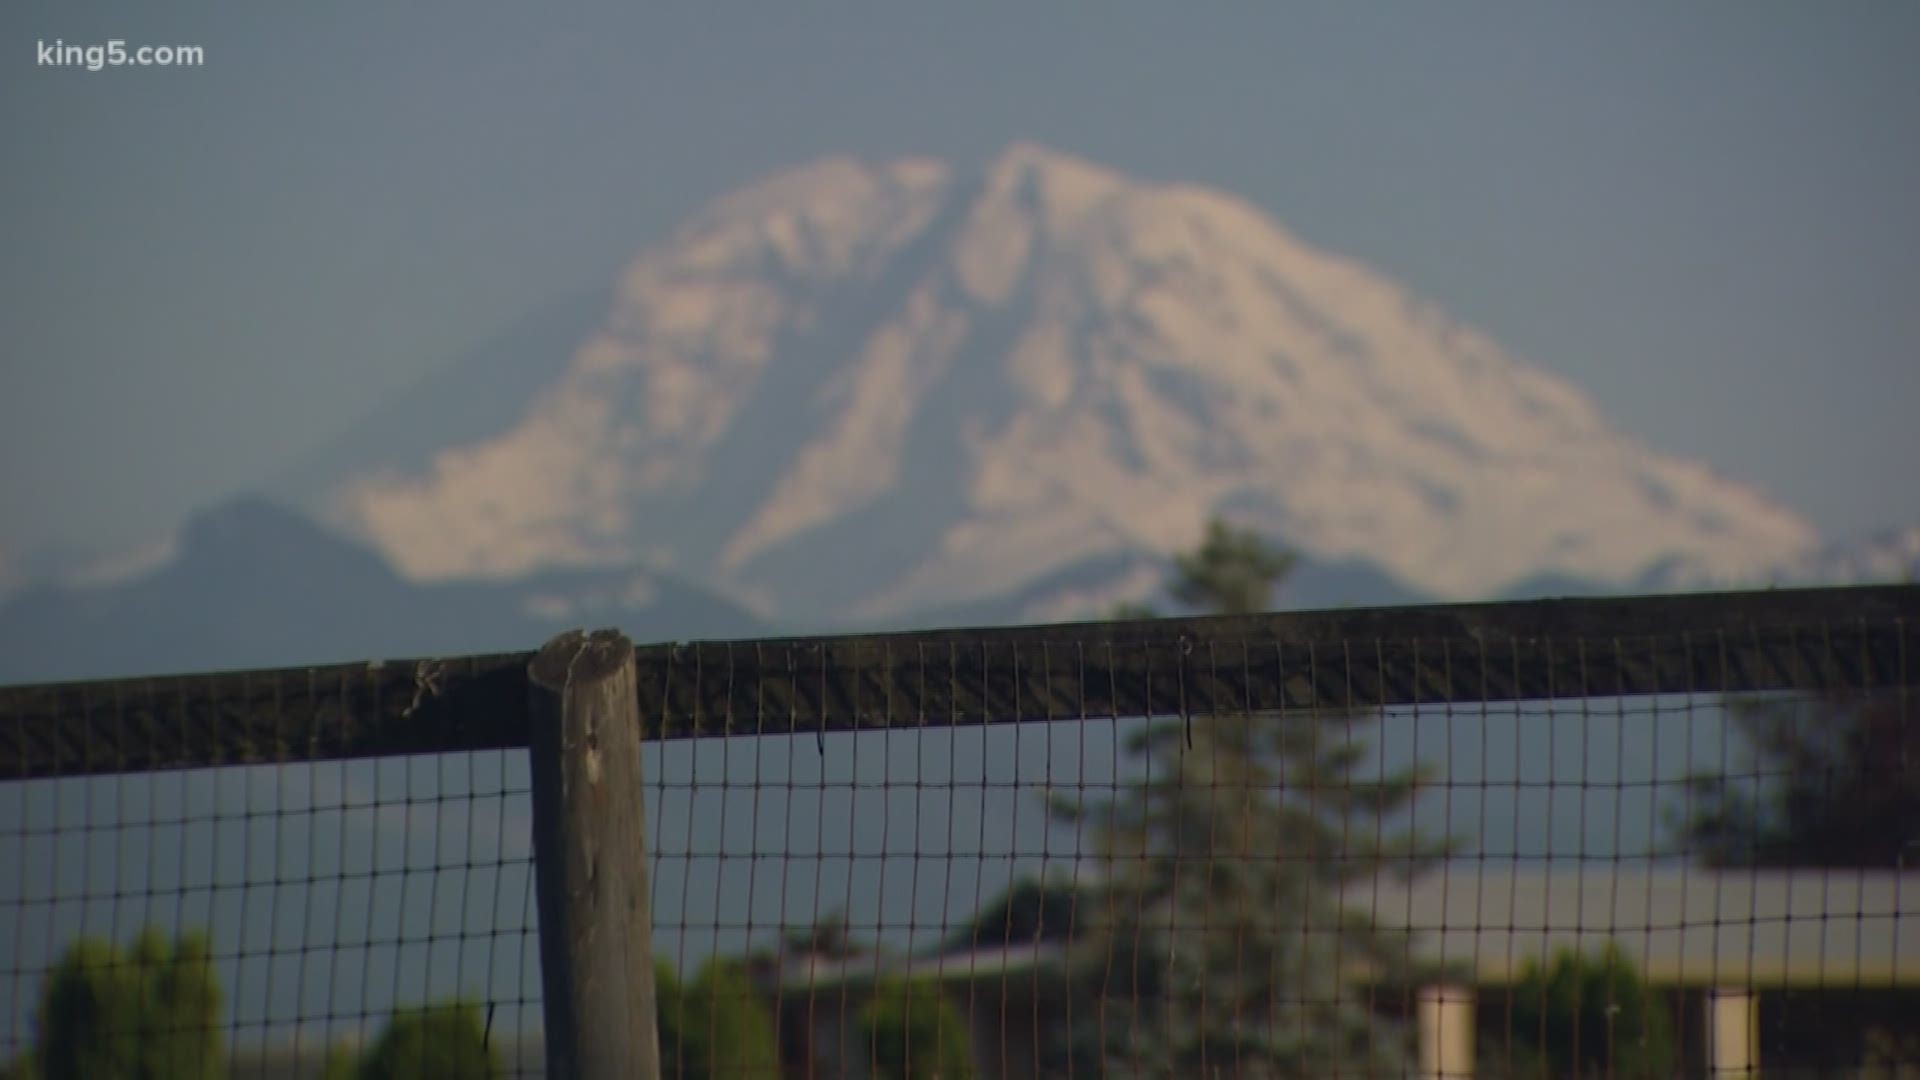 An Enumclaw man who has climbed Mount Rainier more than 100 times has advice for anyone attempting to reach the summit.